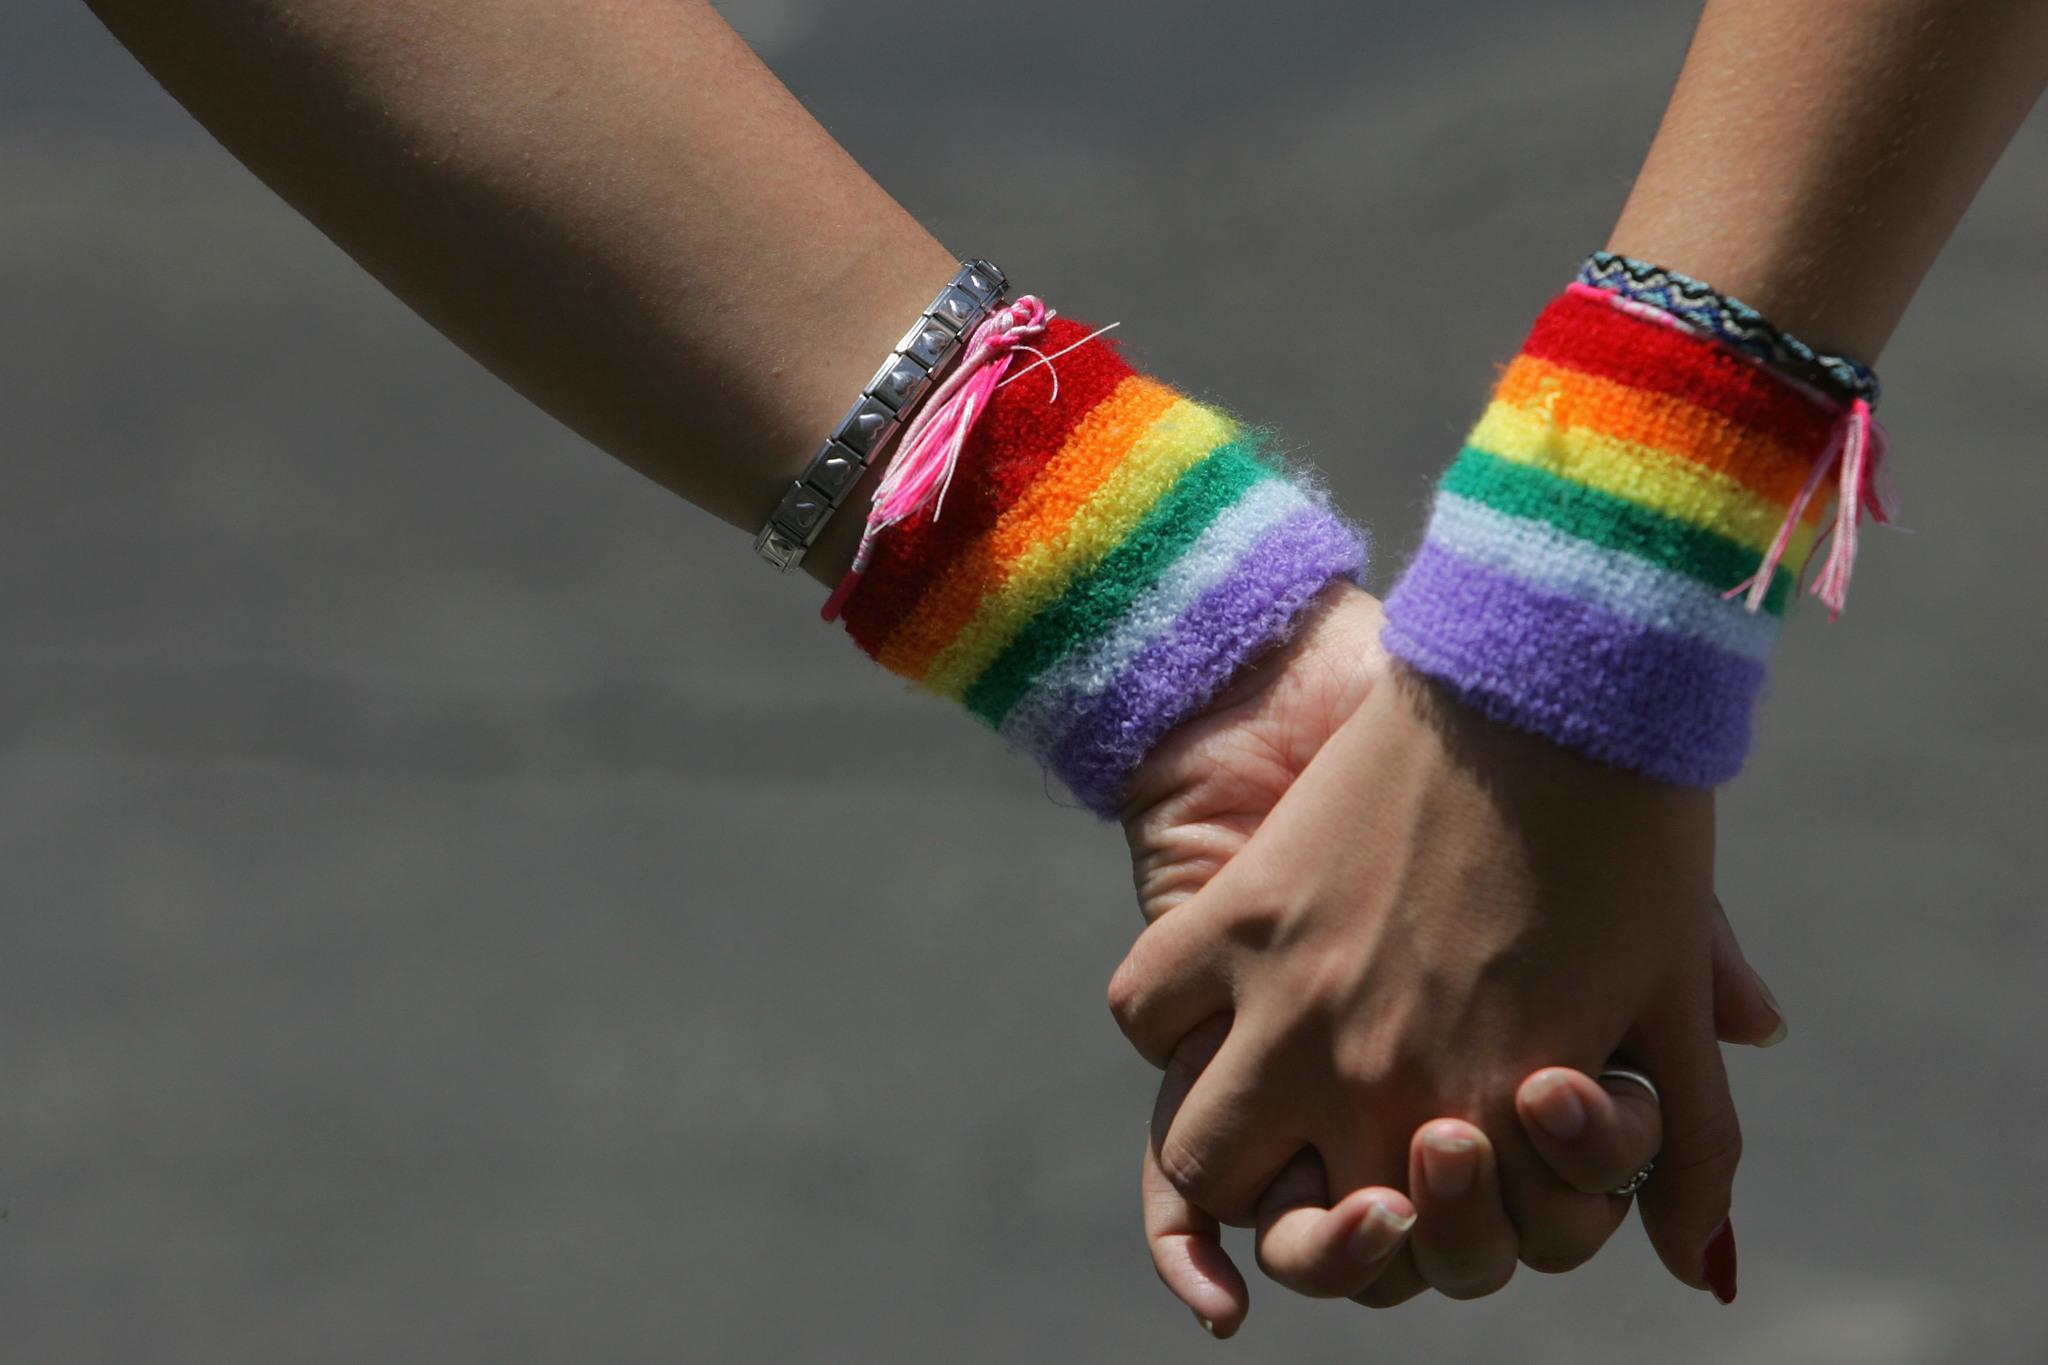 A same-sex marriage referendum will be held in Ireland on 22 May.